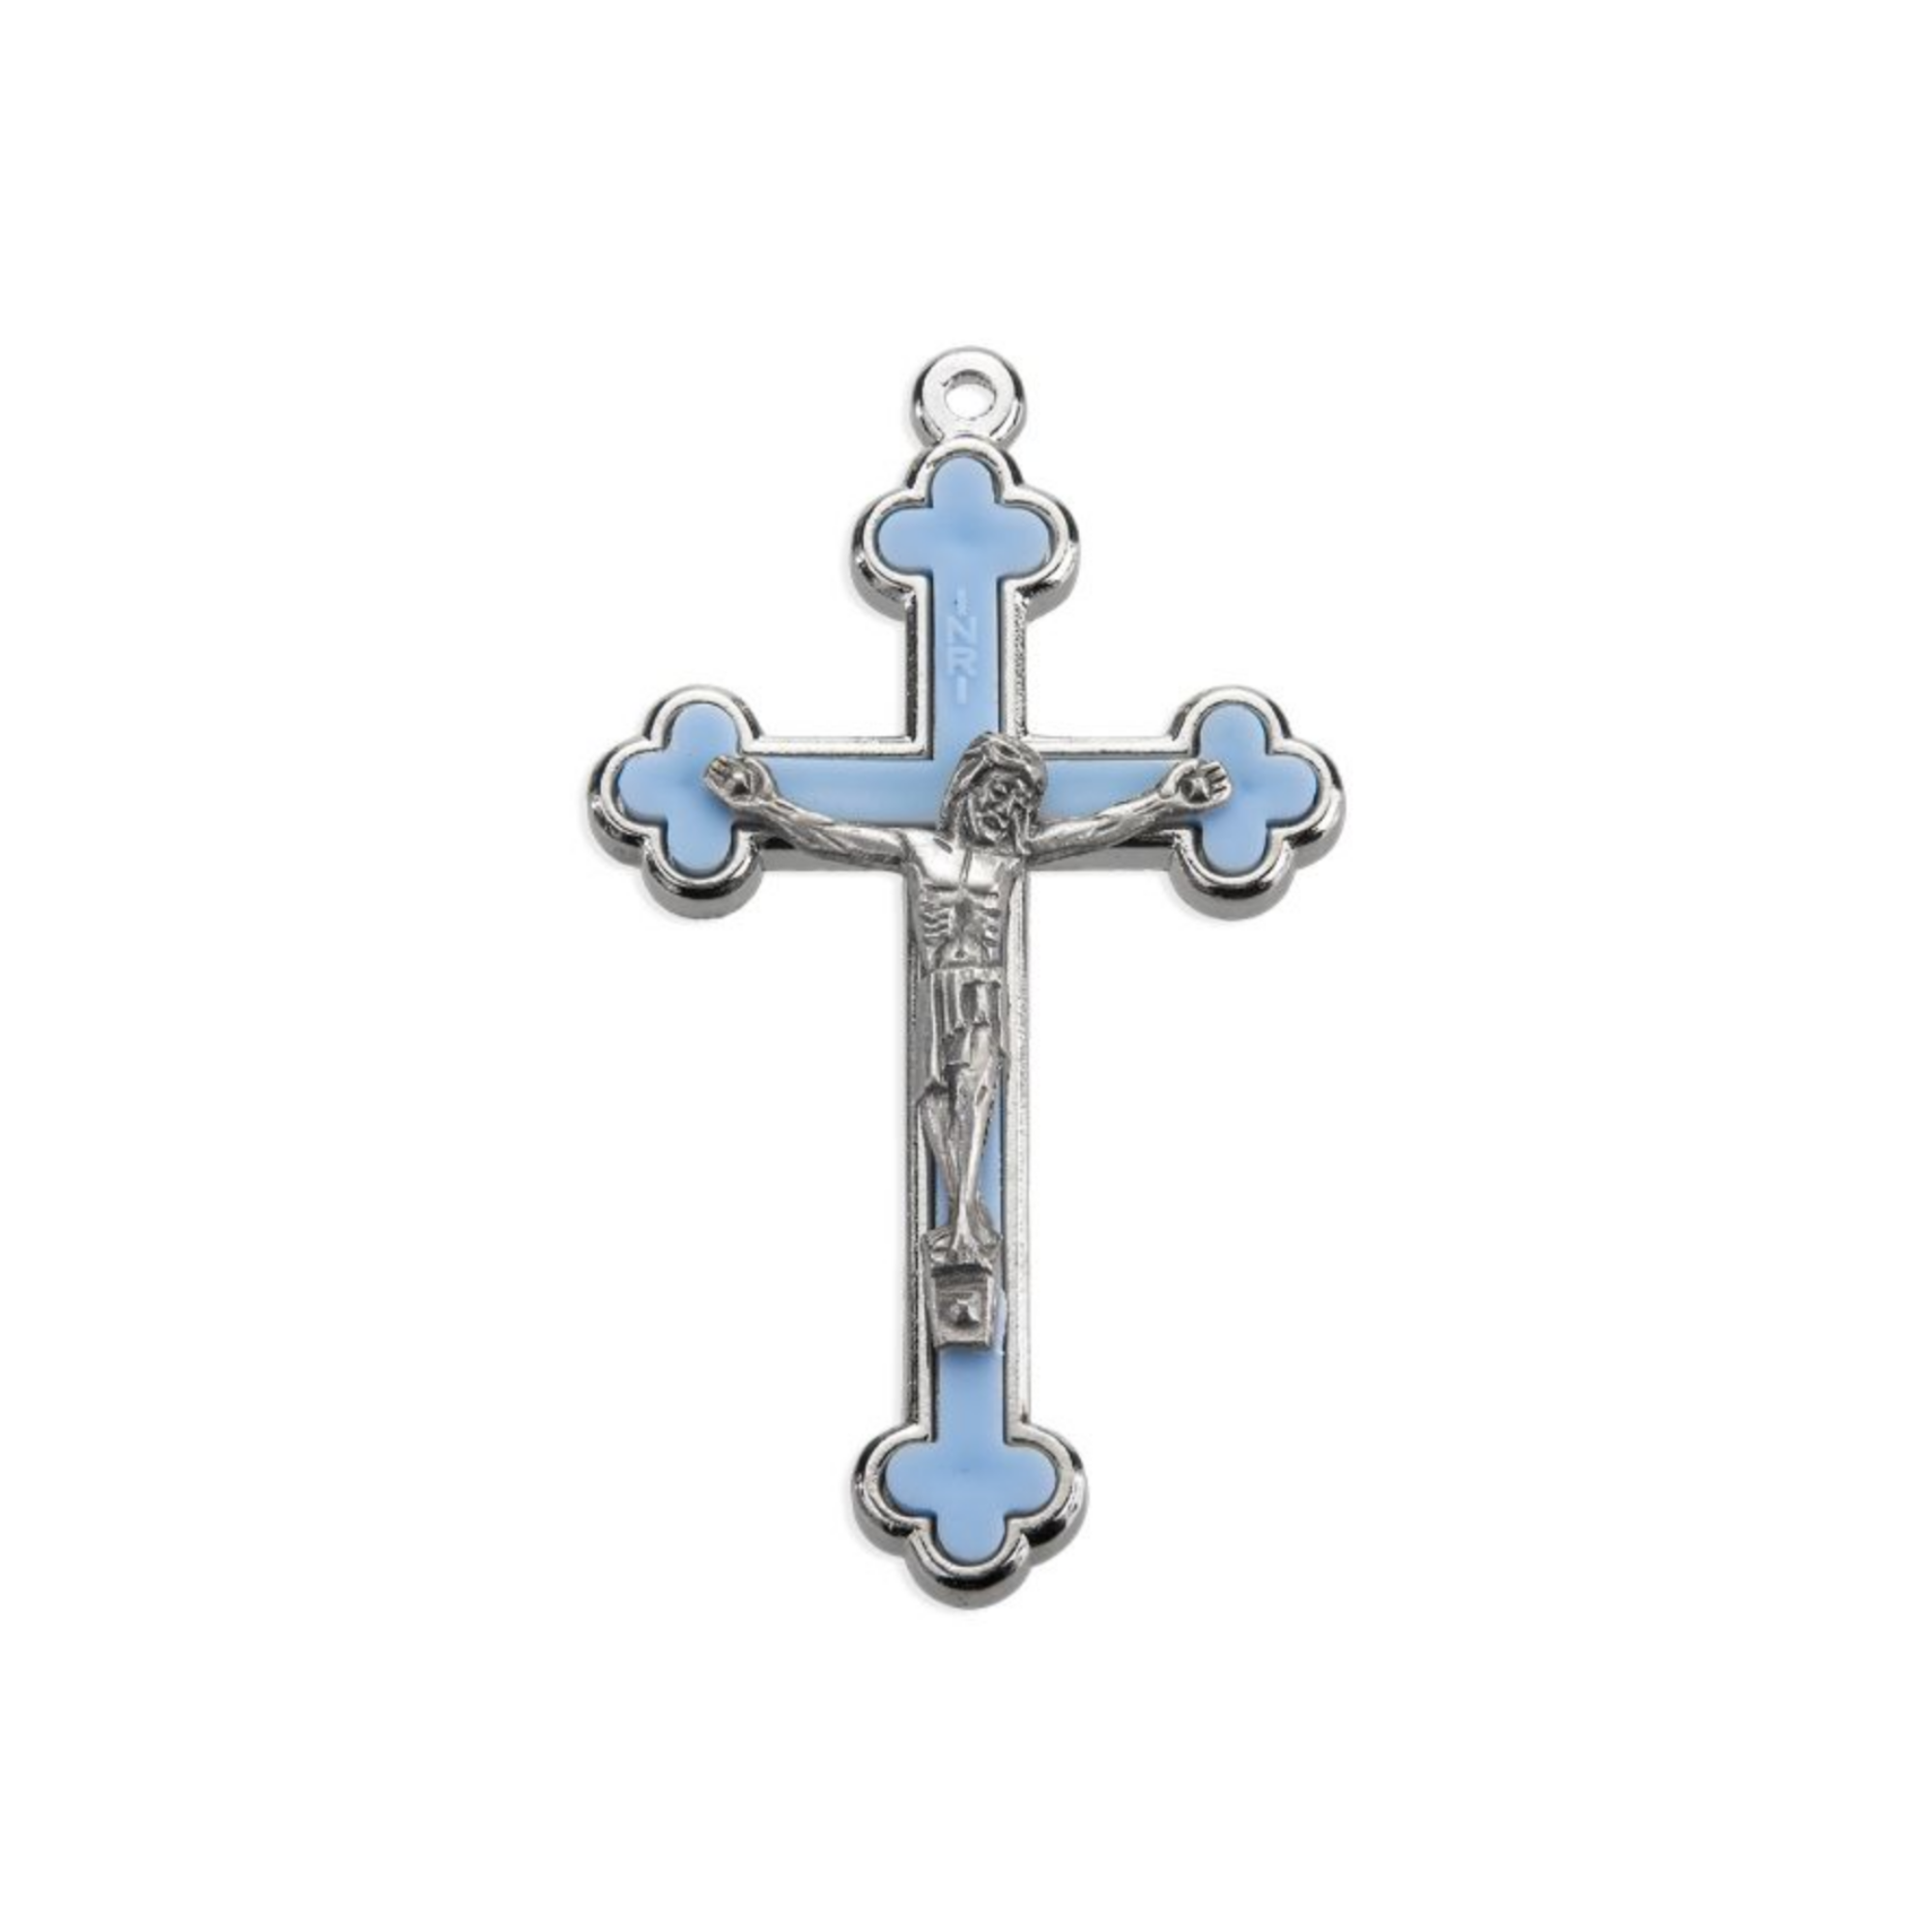 Blue Crucifix Cross with Cloverleaf Budded Ends - Metal Bound - 2.5" Long - Made in Italy